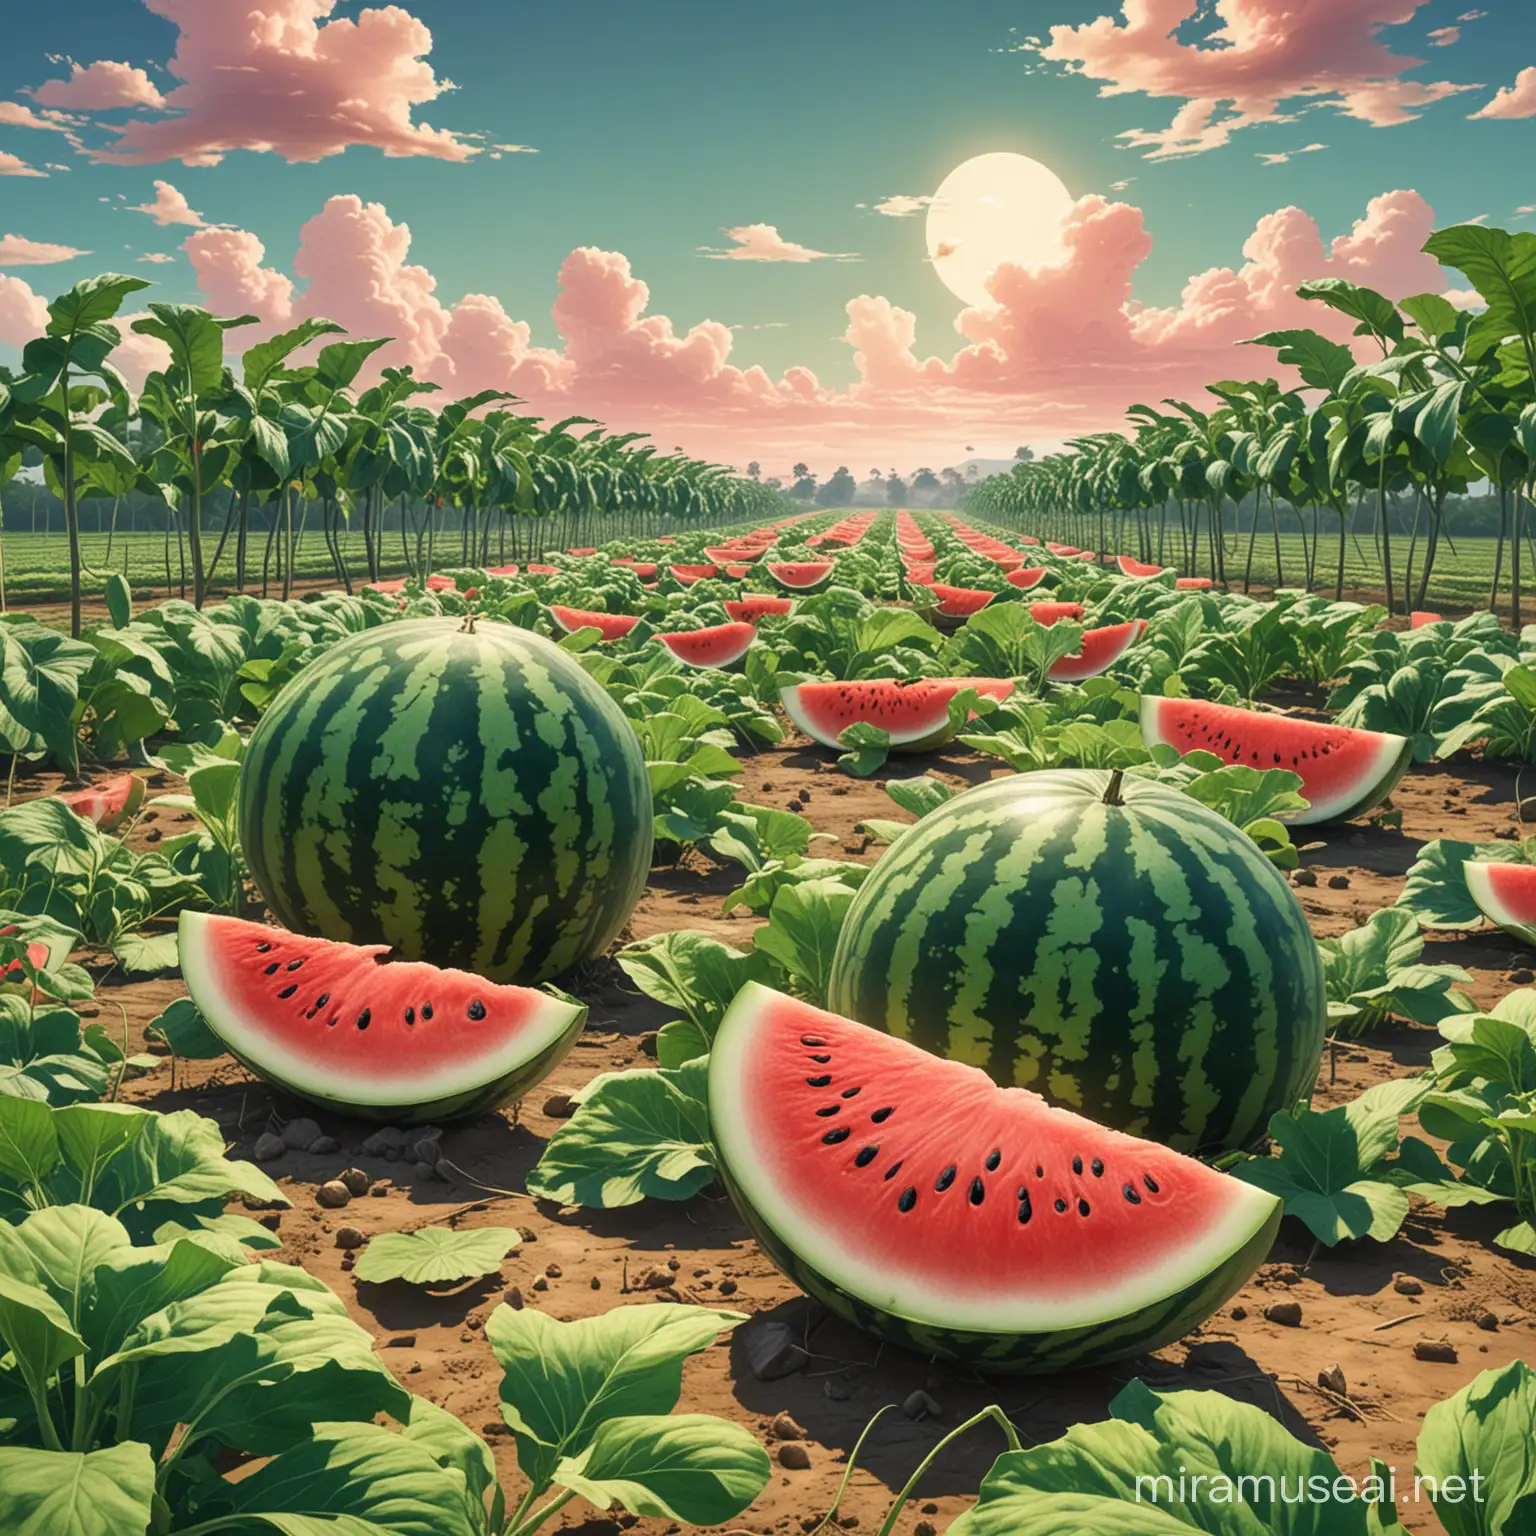 Anime Style Watermelon Farming Scene Vibrant Characters Harvesting Juicy Melons